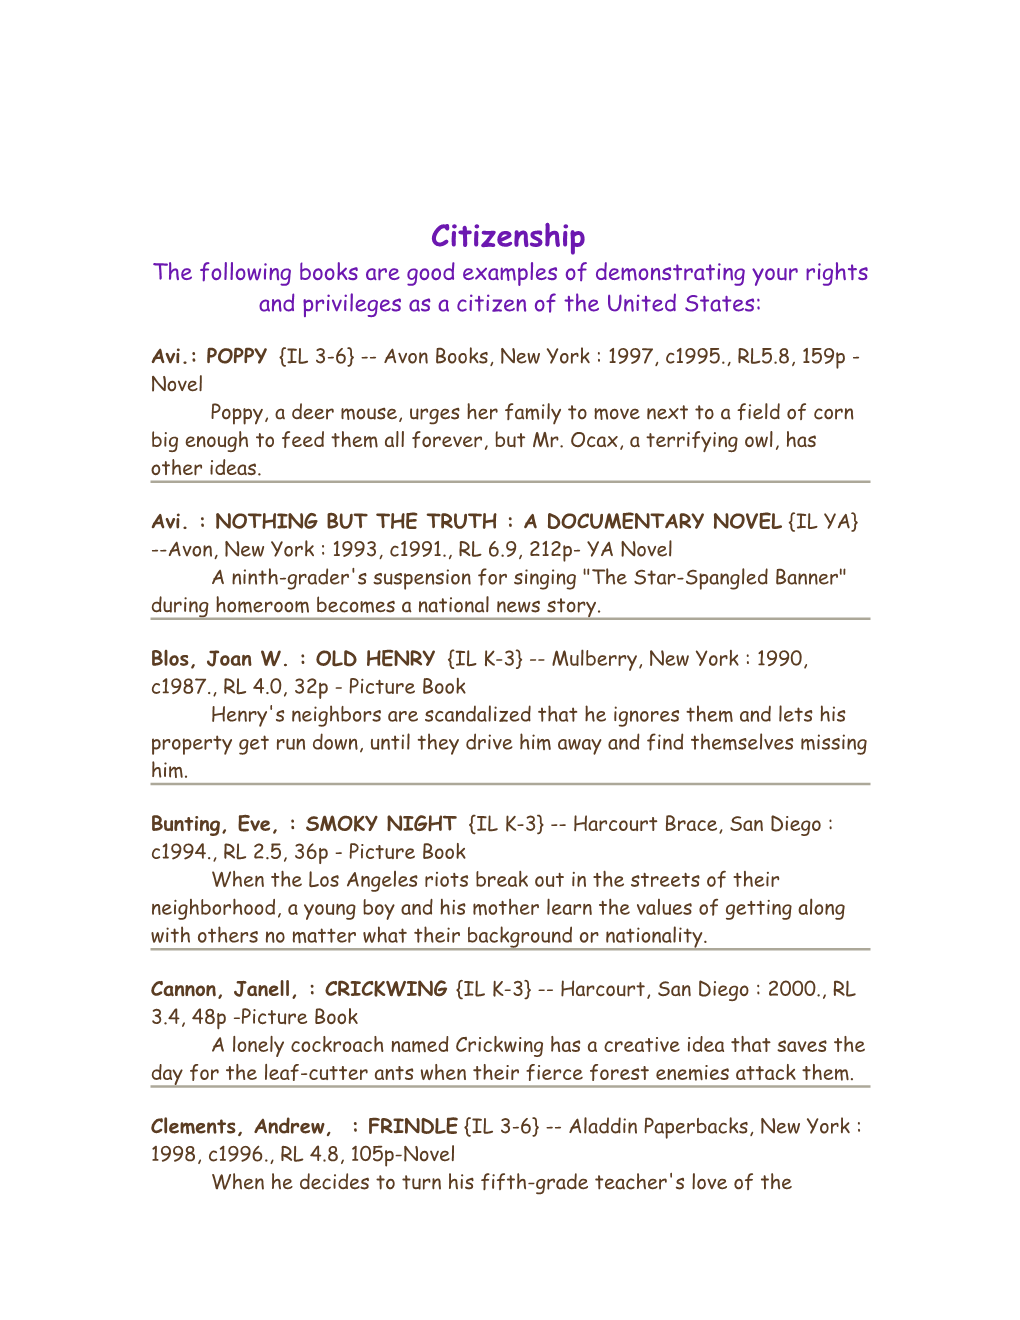 Citizenship the Following Books Are Good Examples of Demonstrating Your Rights and Privileges